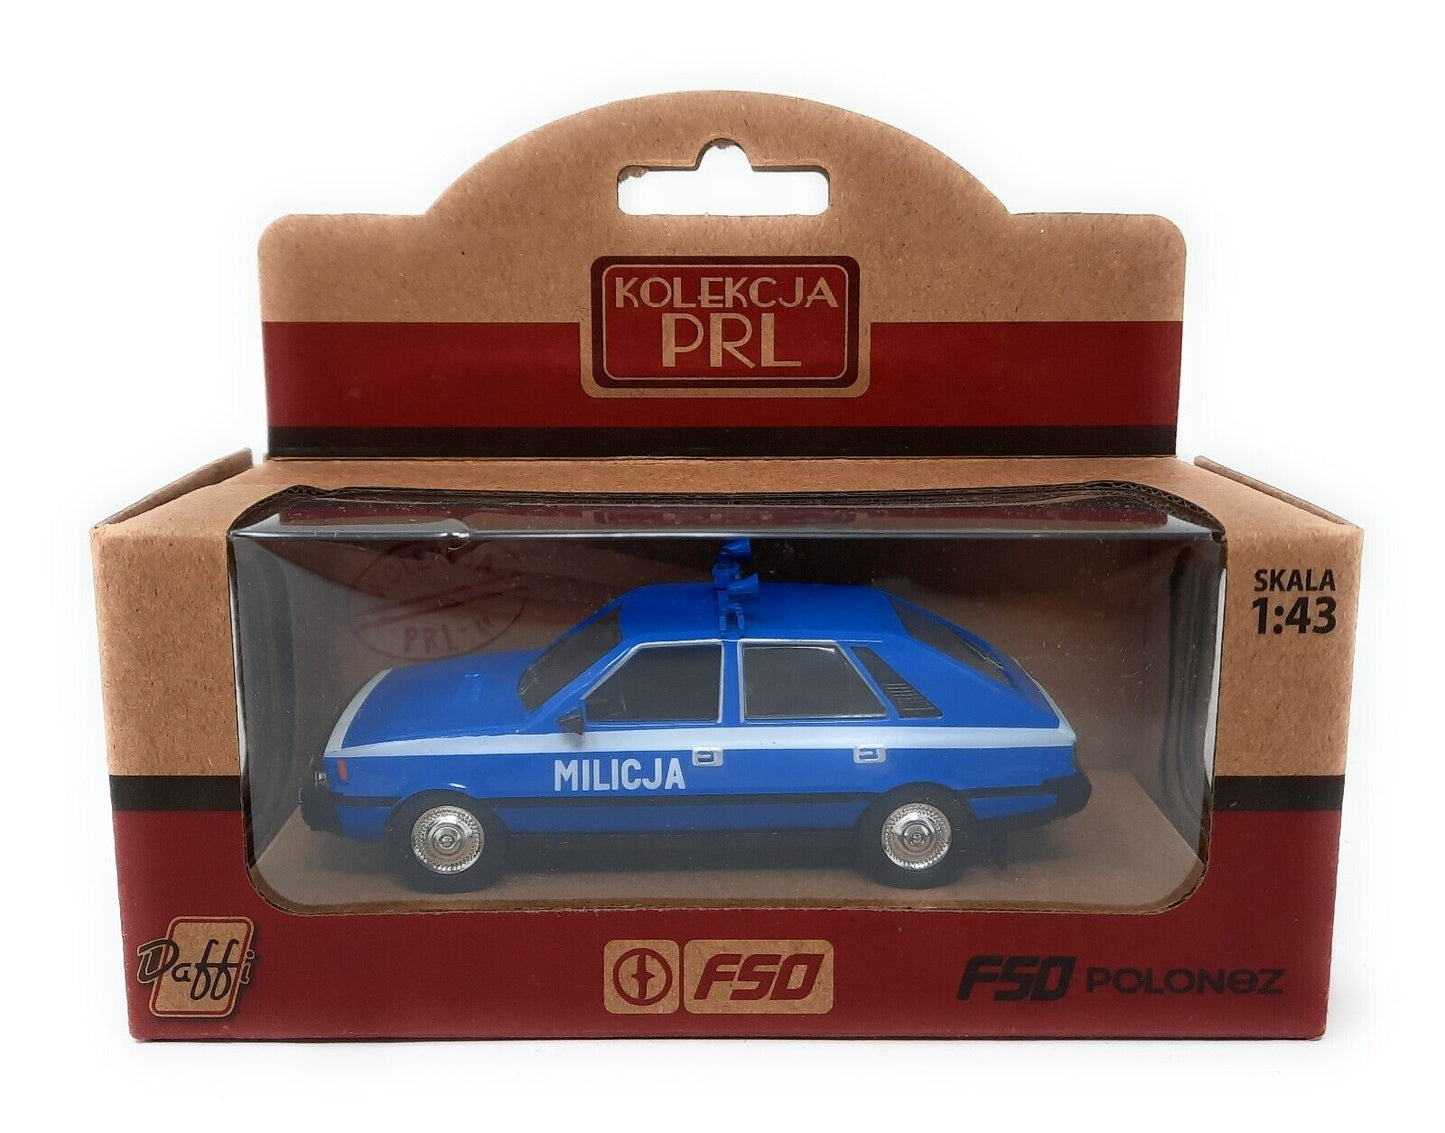 Toy Car - FSO Polonez Police Department Car